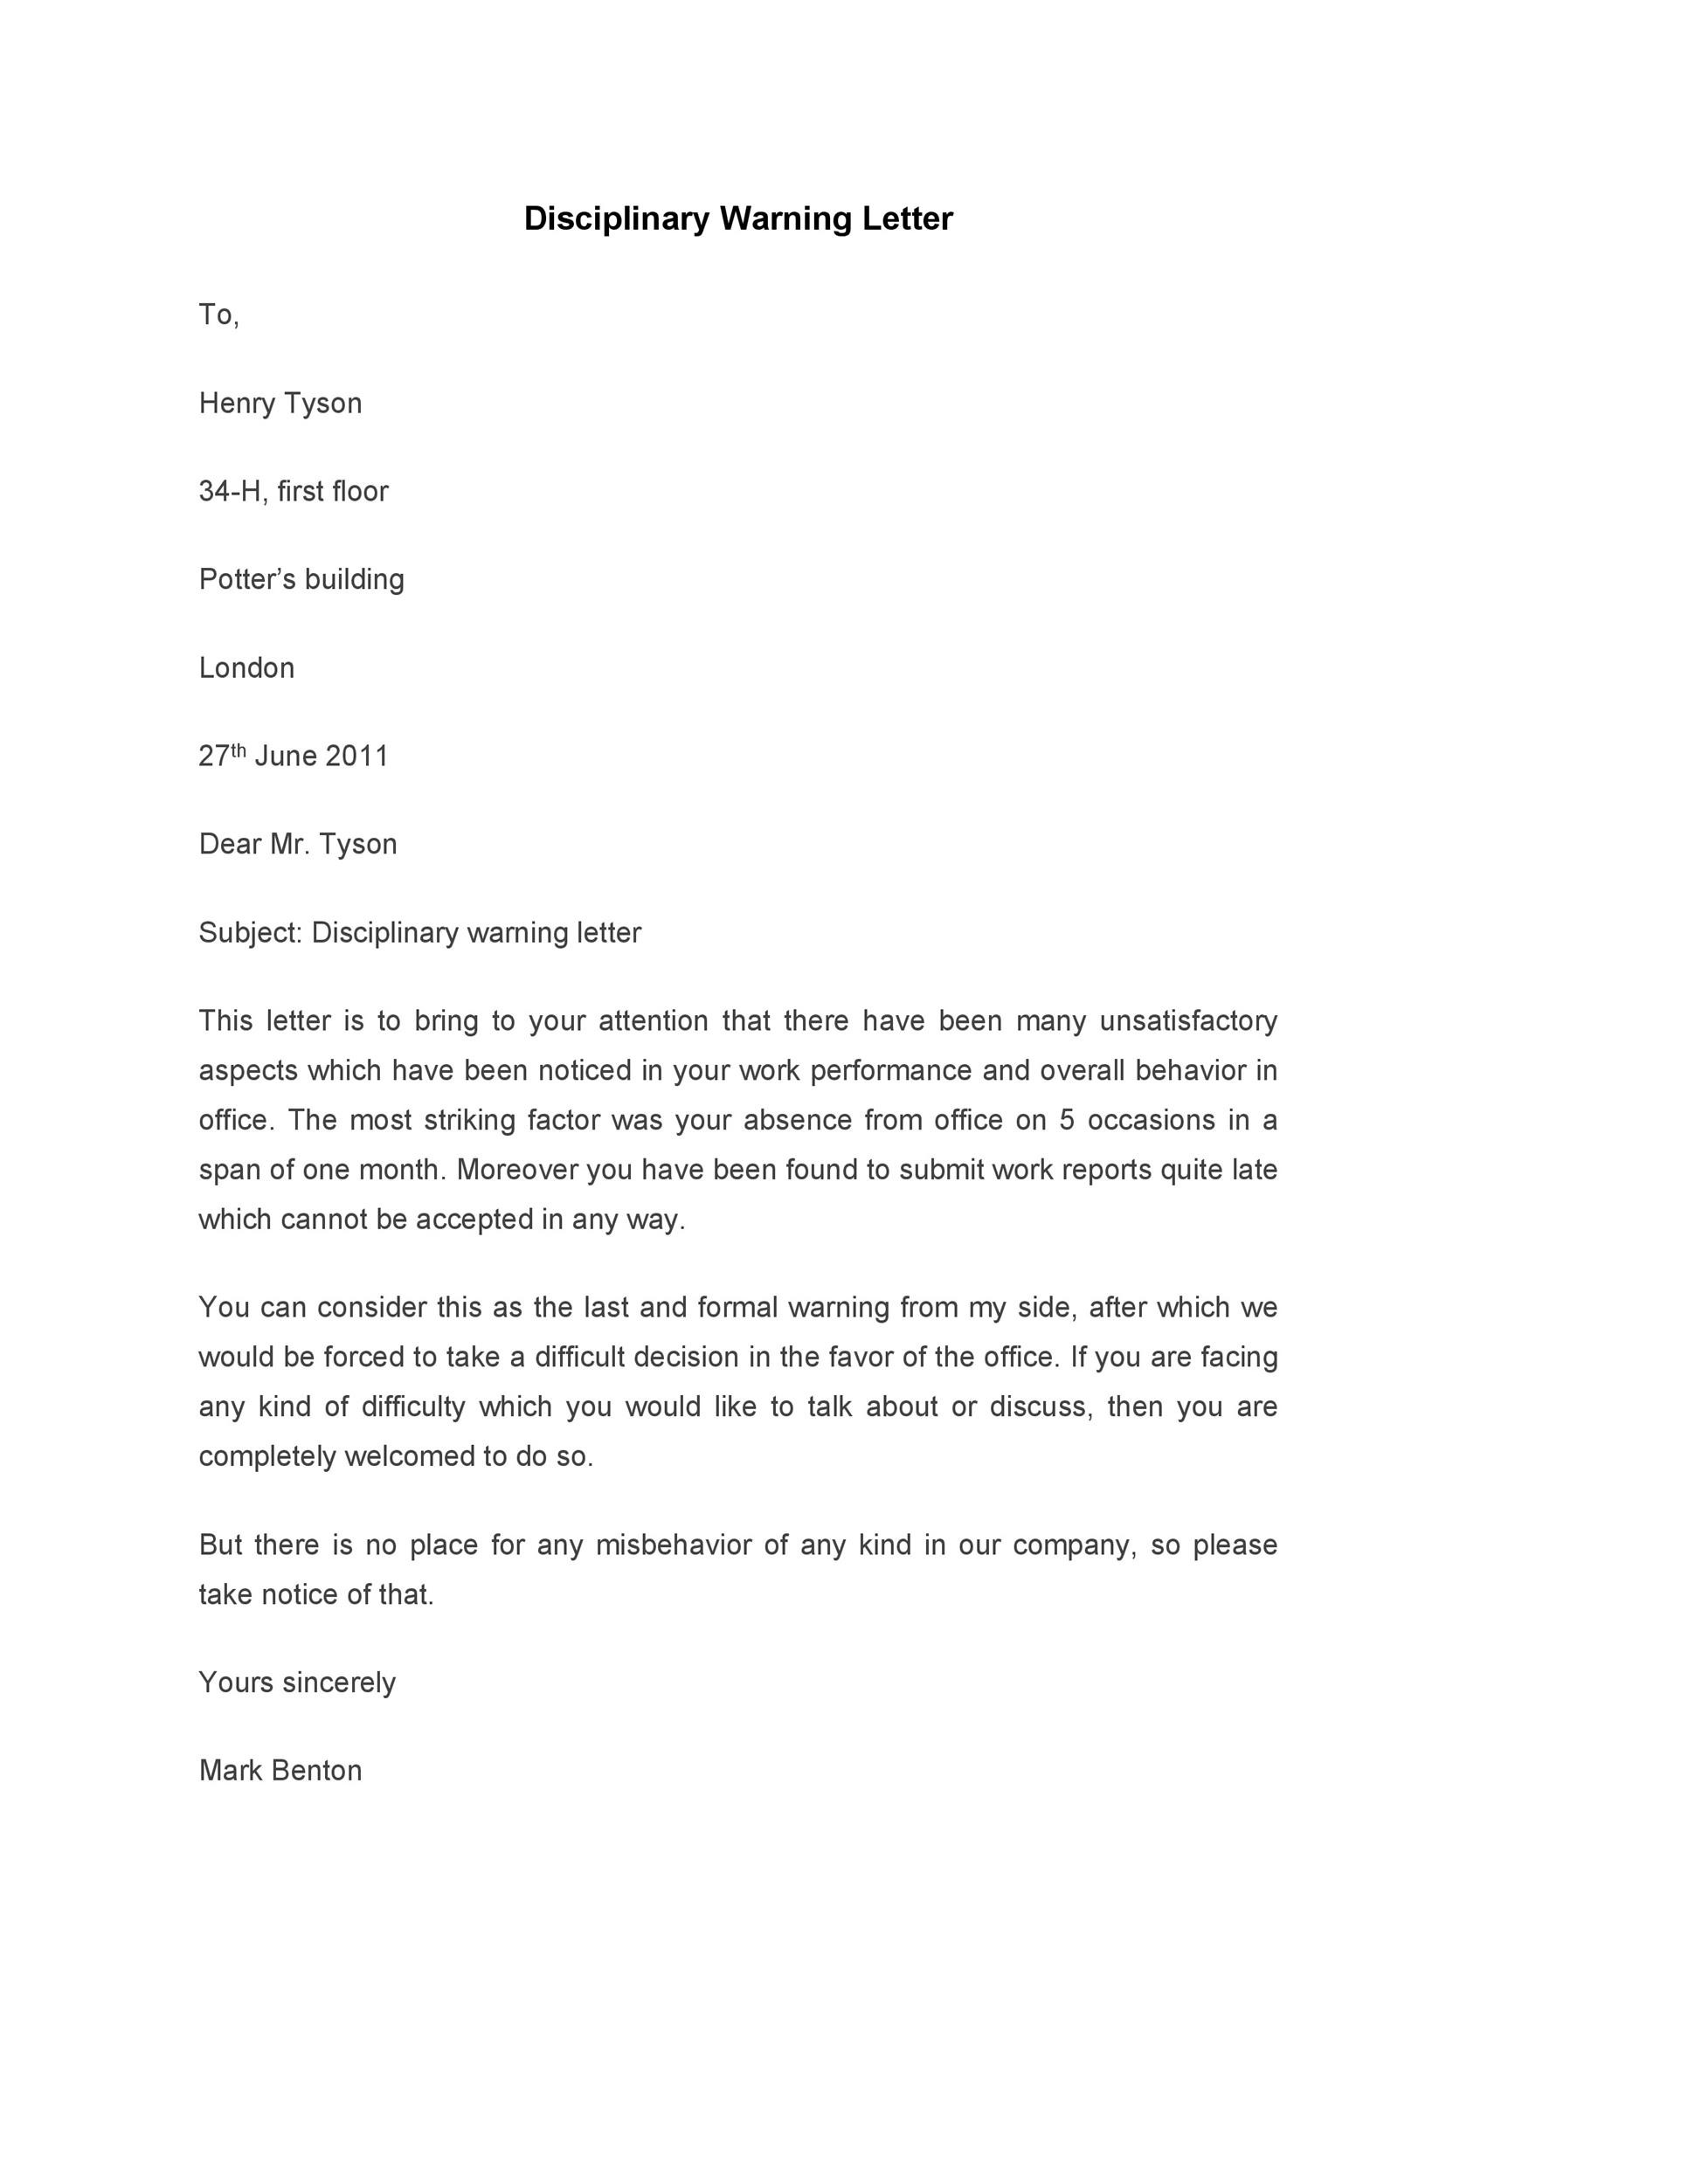 49 Professional Warning Letters (Free Templates) ᐅ TemplateLab